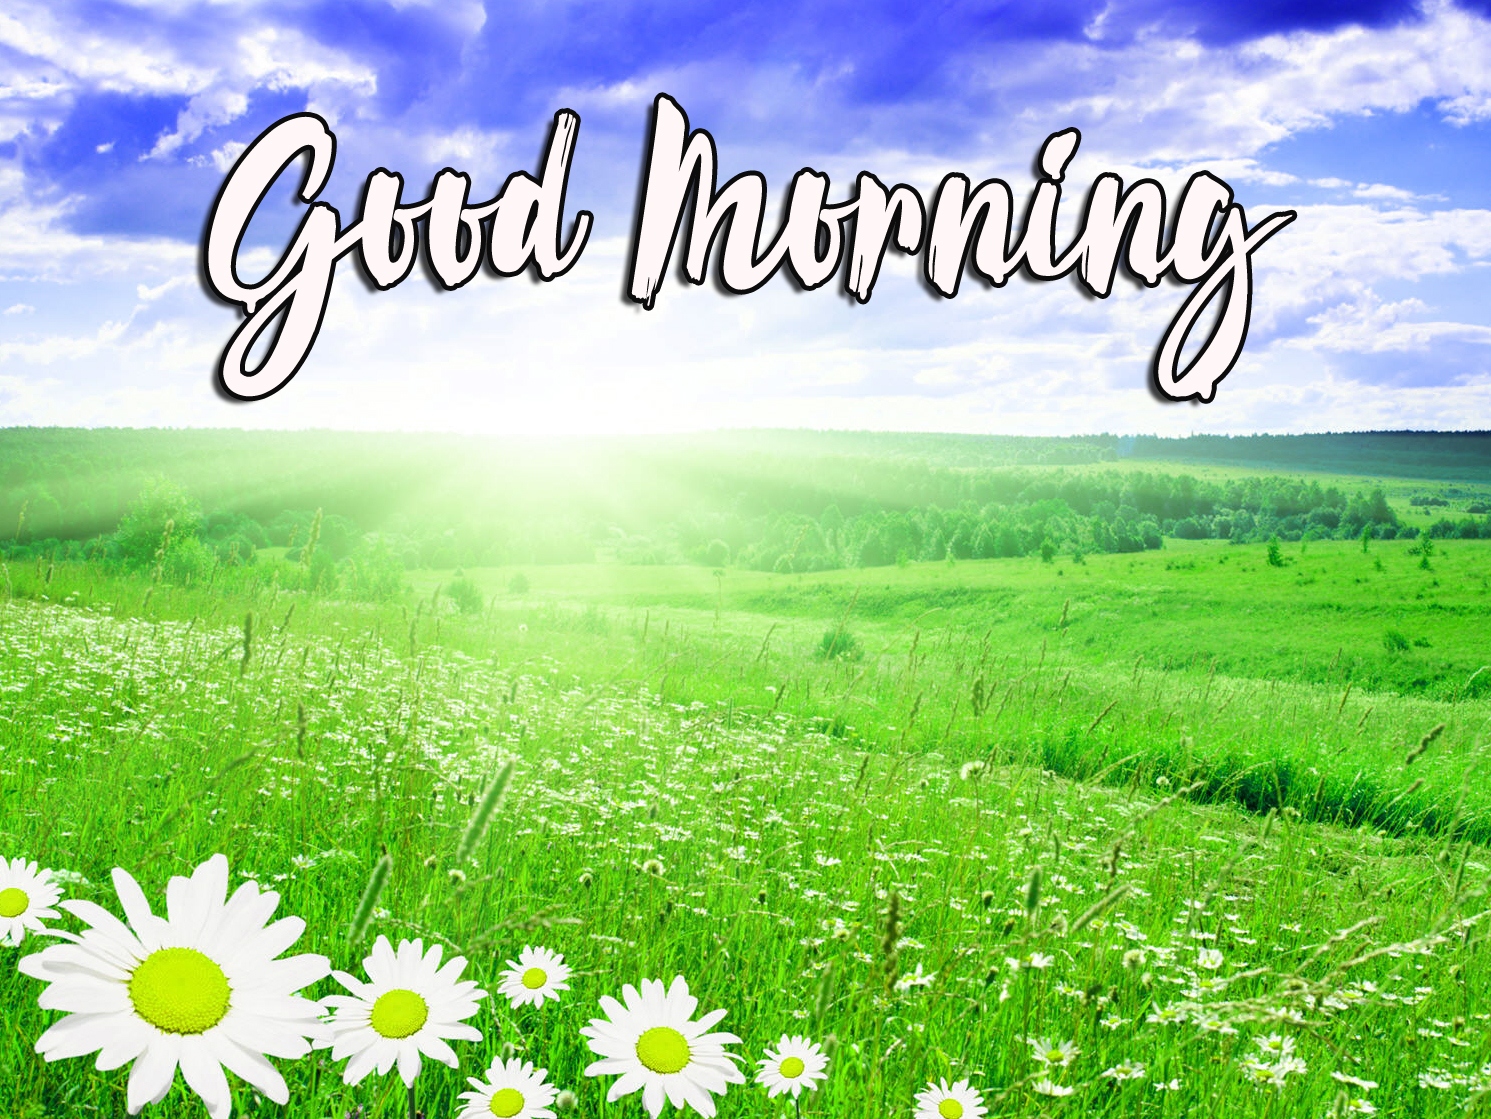 Good Morning Images Photo Download 